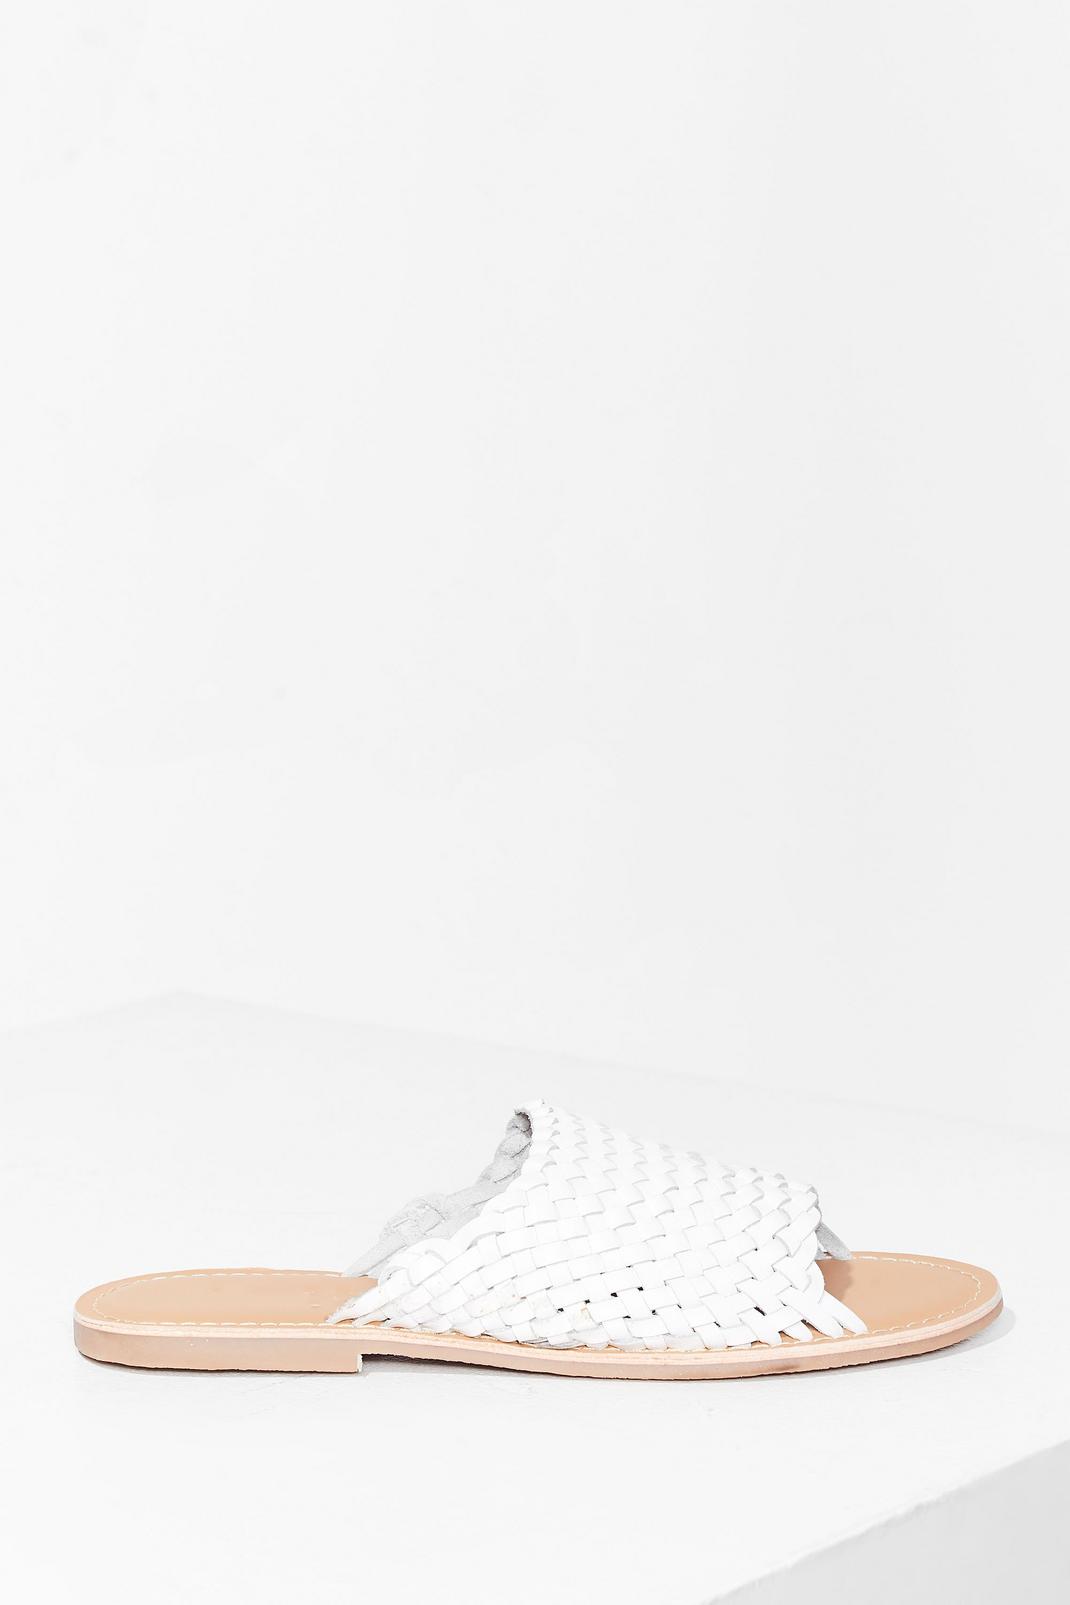 White Woven Strap Leather Flat Sandals image number 1